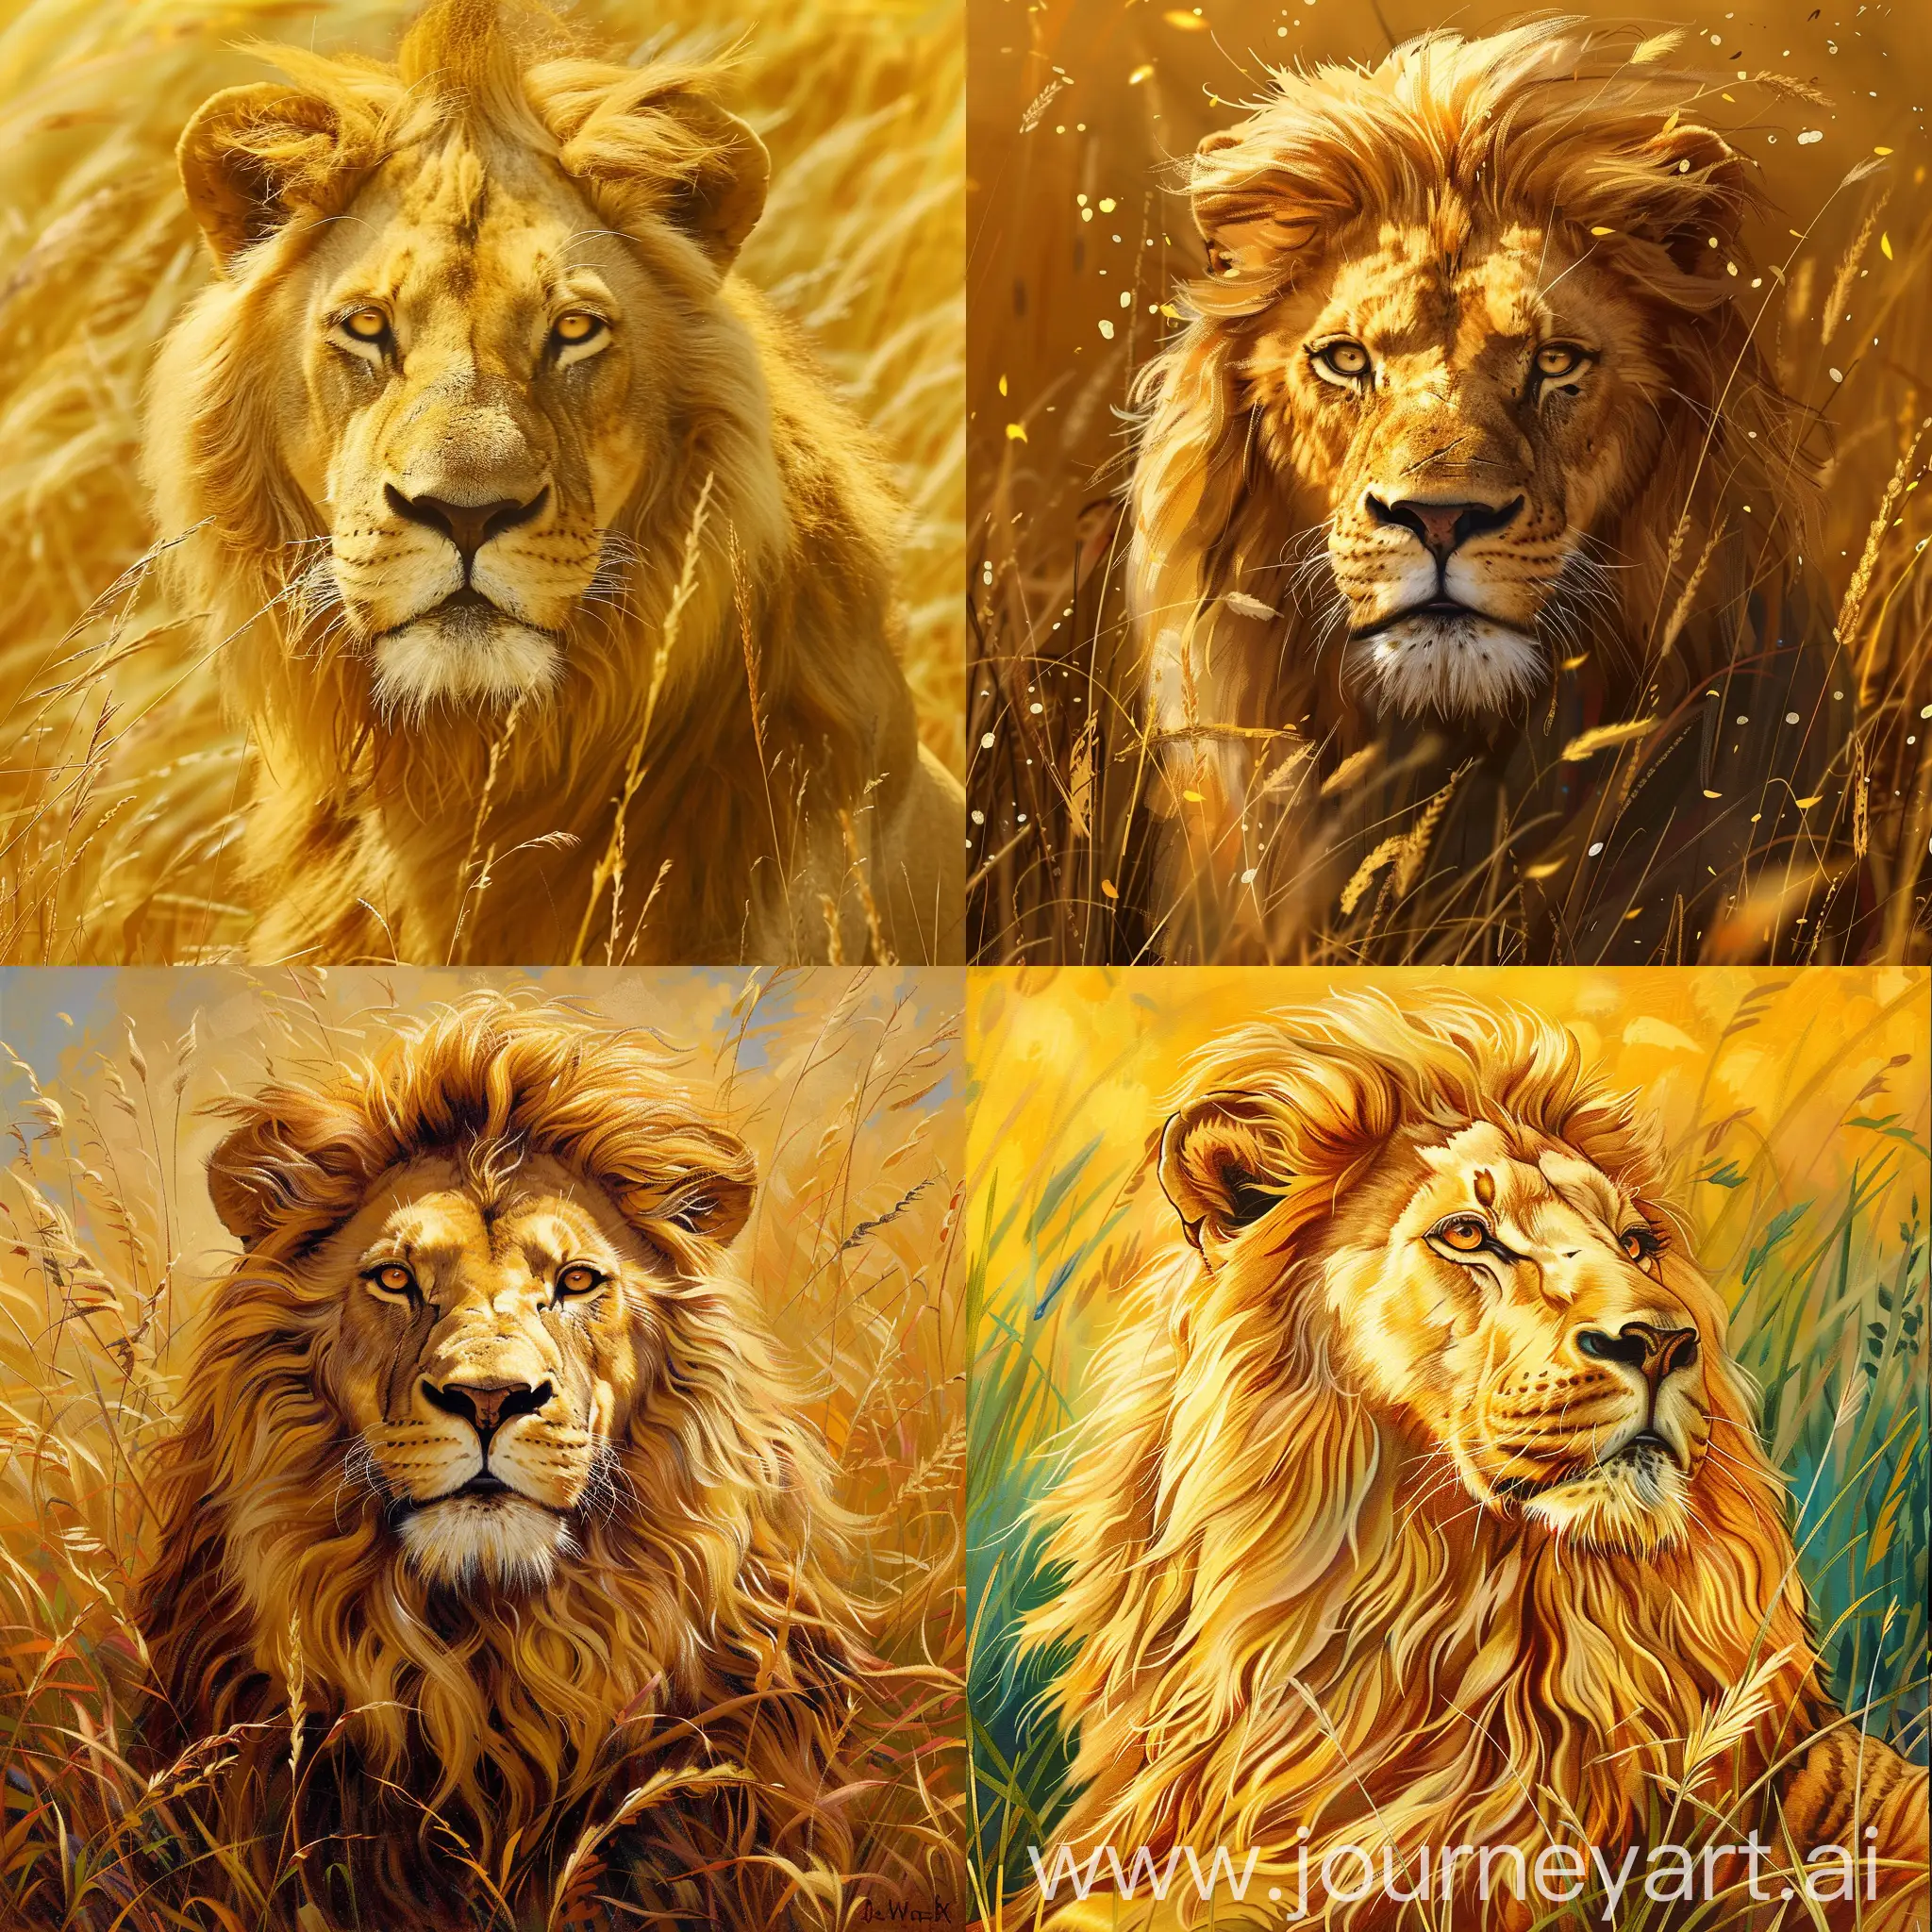 Majestic-Golden-Lion-in-Natural-Grass-Setting